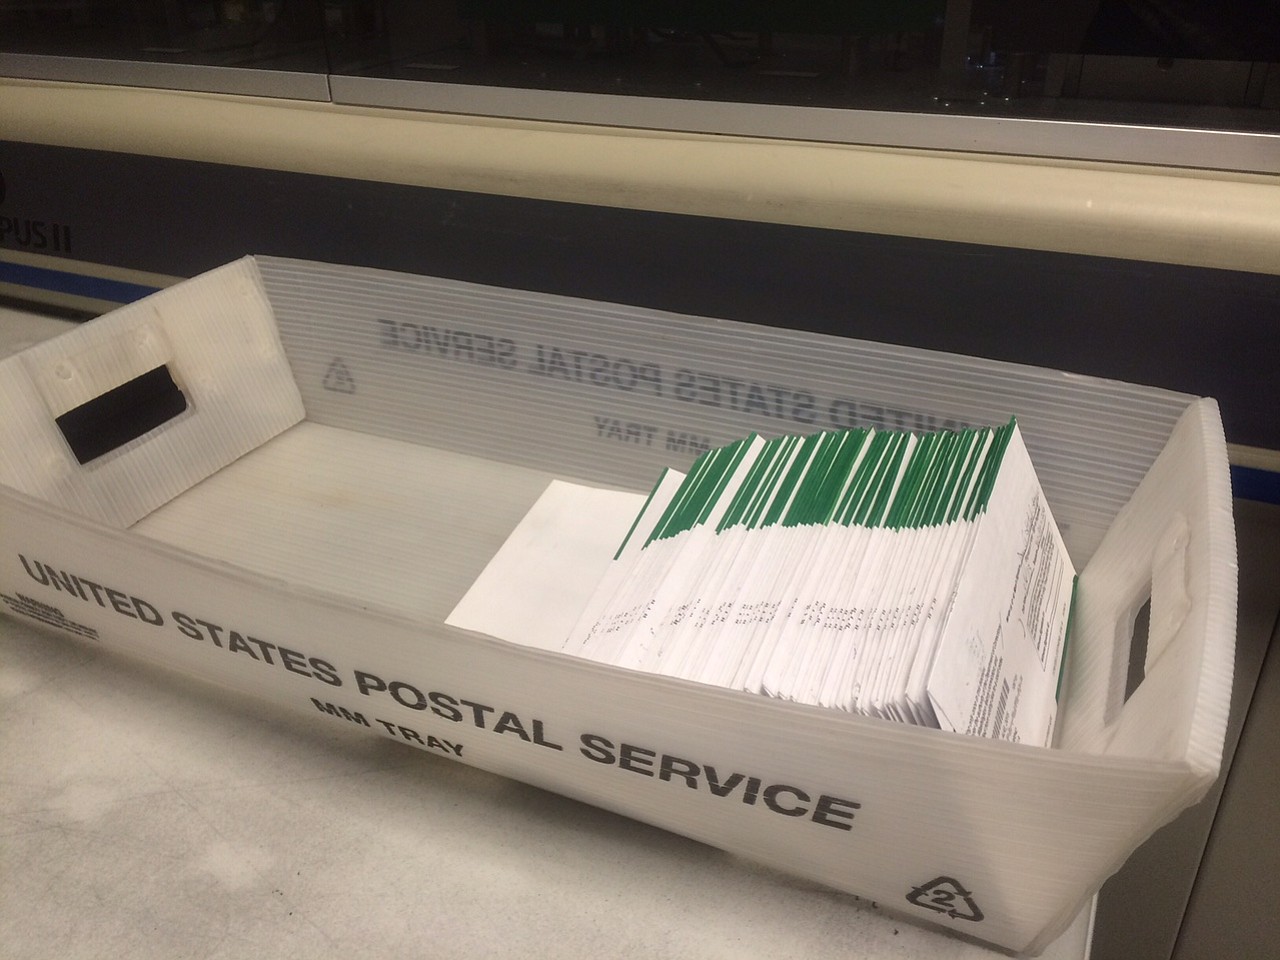 A United States Postal Service tray contains some of the hundreds of ballots received in the mail Friday by Clark County elections officials.